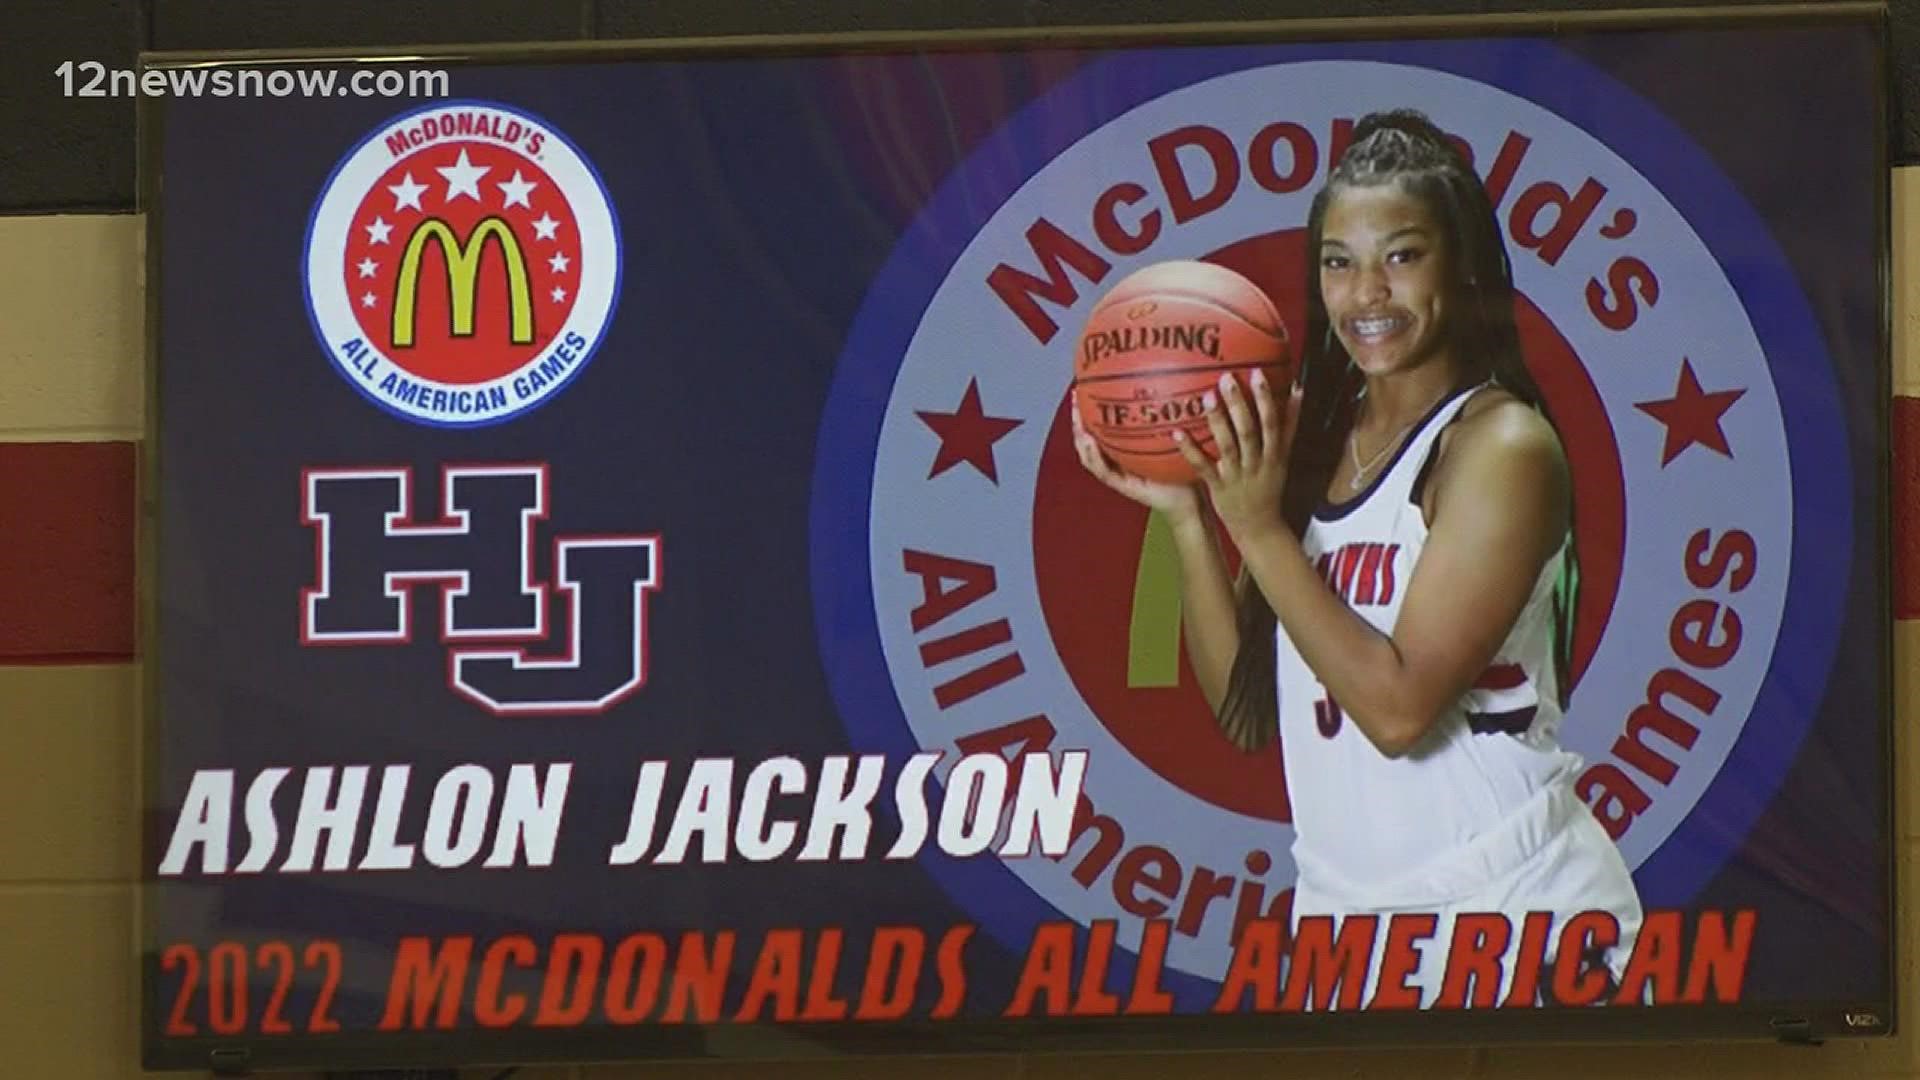 Ashlon Jackson heads to Chicago to represent the 409 in the McDonald's All American Games.